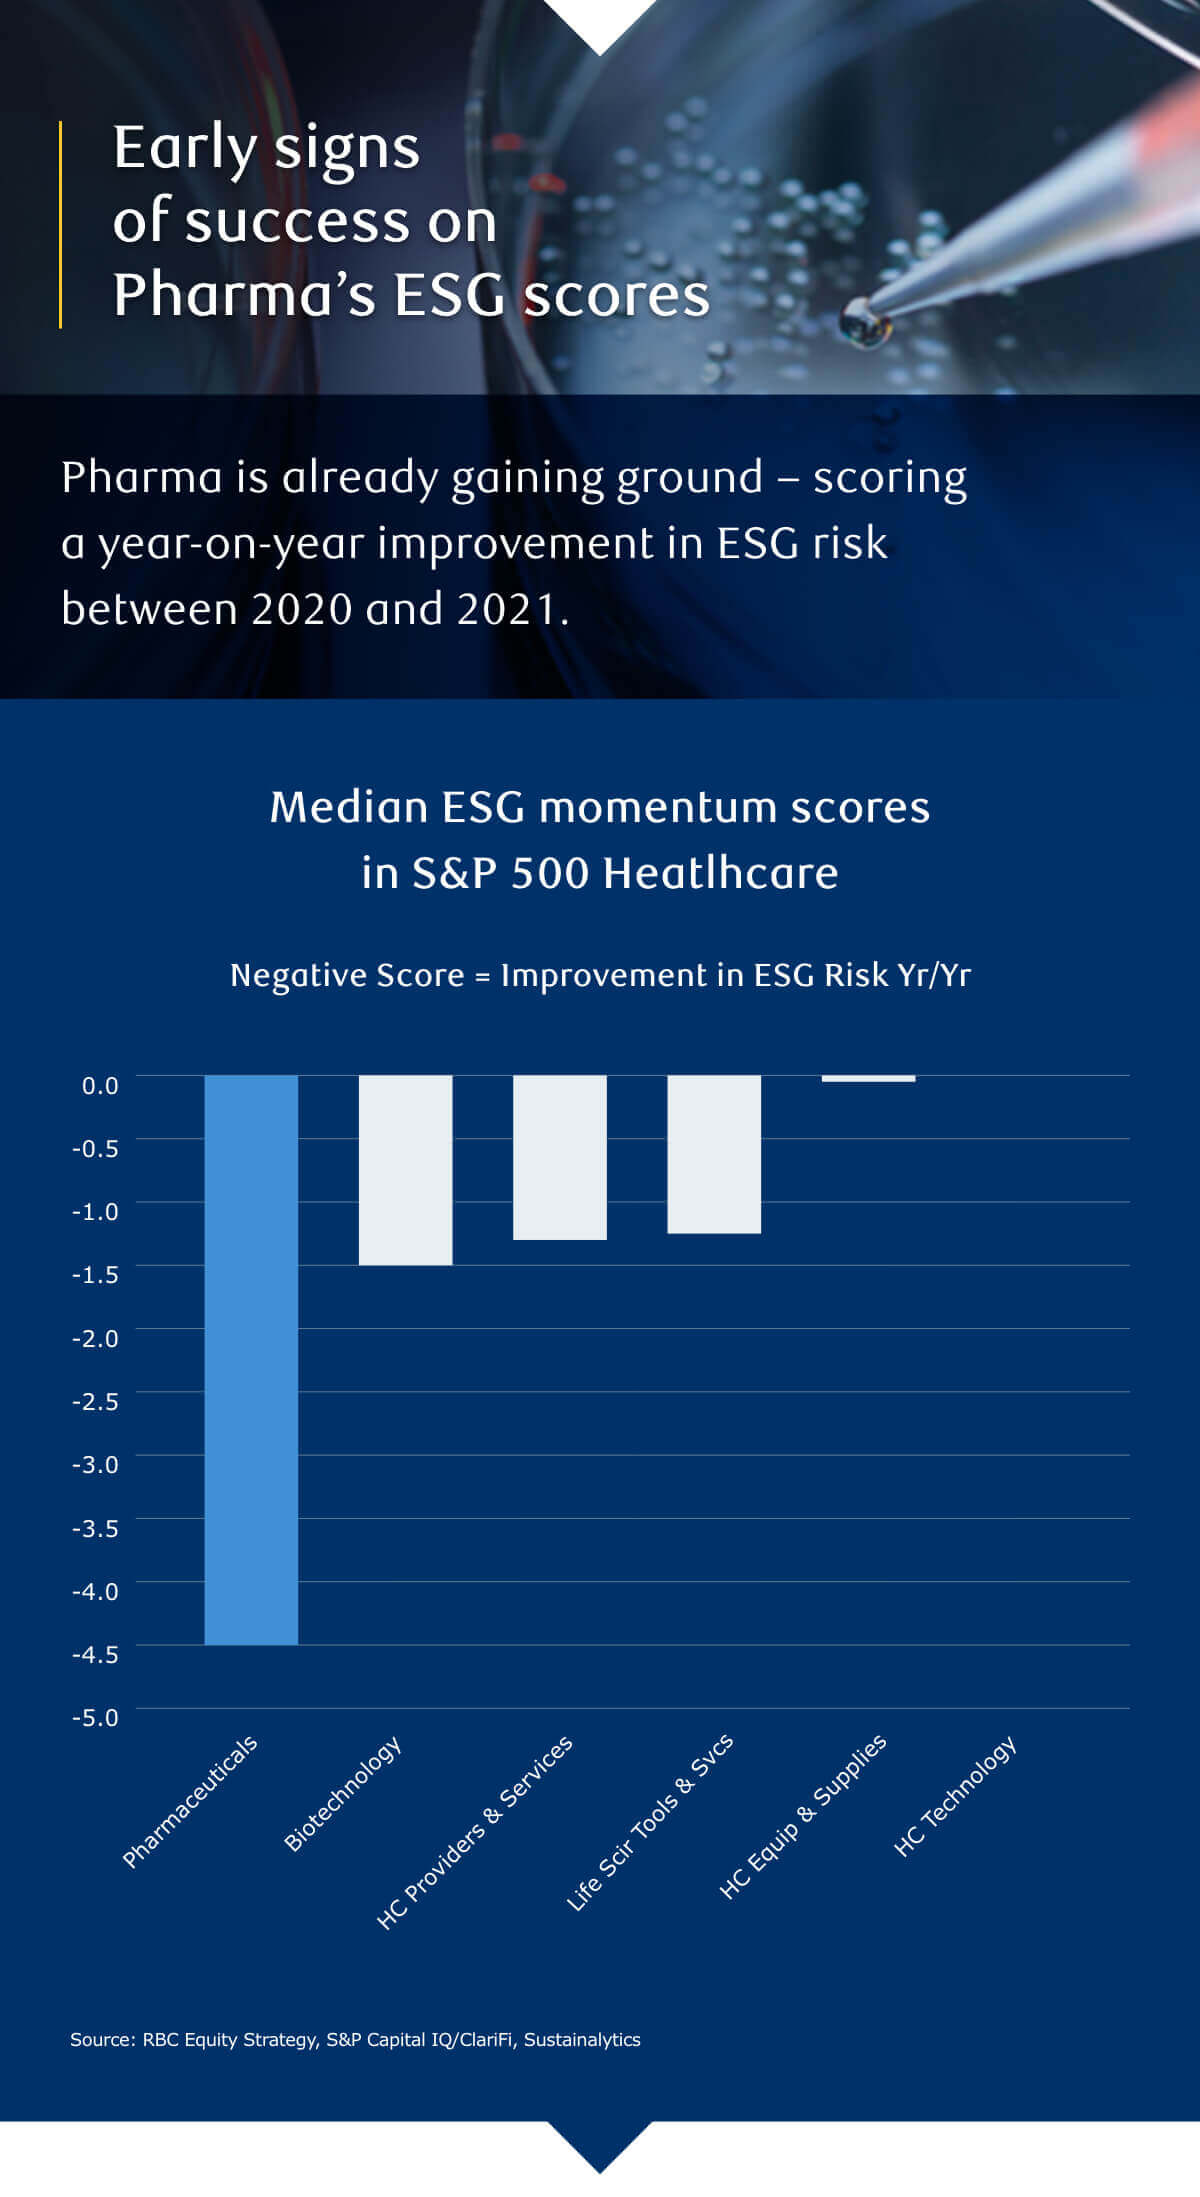 Early signs of success on Pharma's ESG scores. Pharma is already gaining ground - scoring a year-on-year improvement in ESG risk between 2020 and 2021.